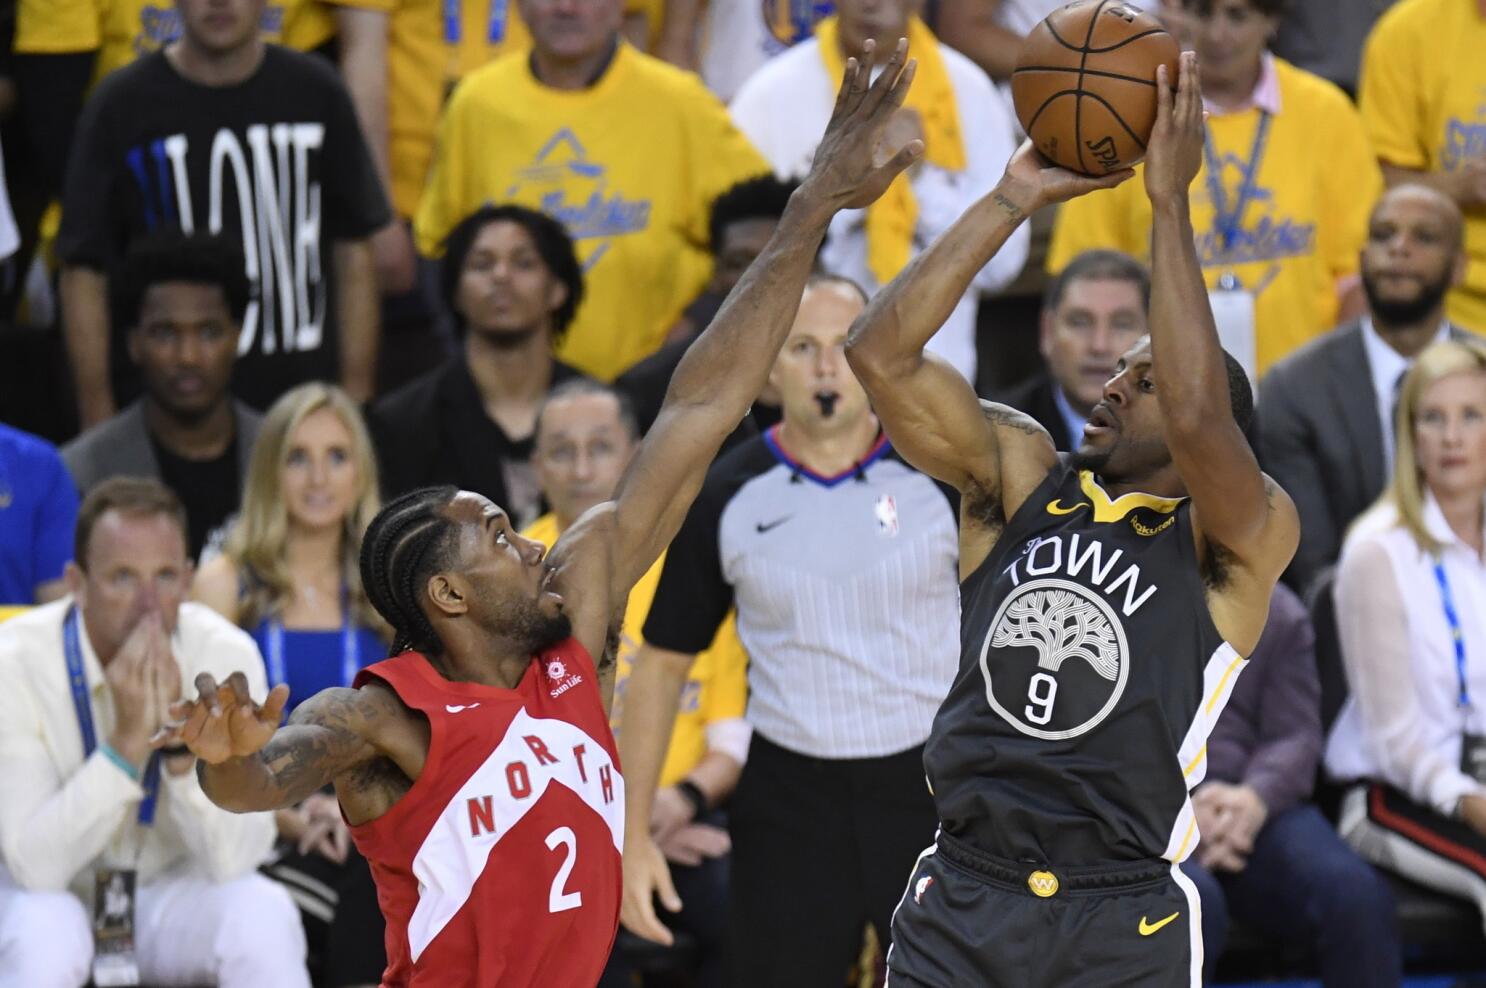 Raptors make NBA history by defeating Warriors to win Finals